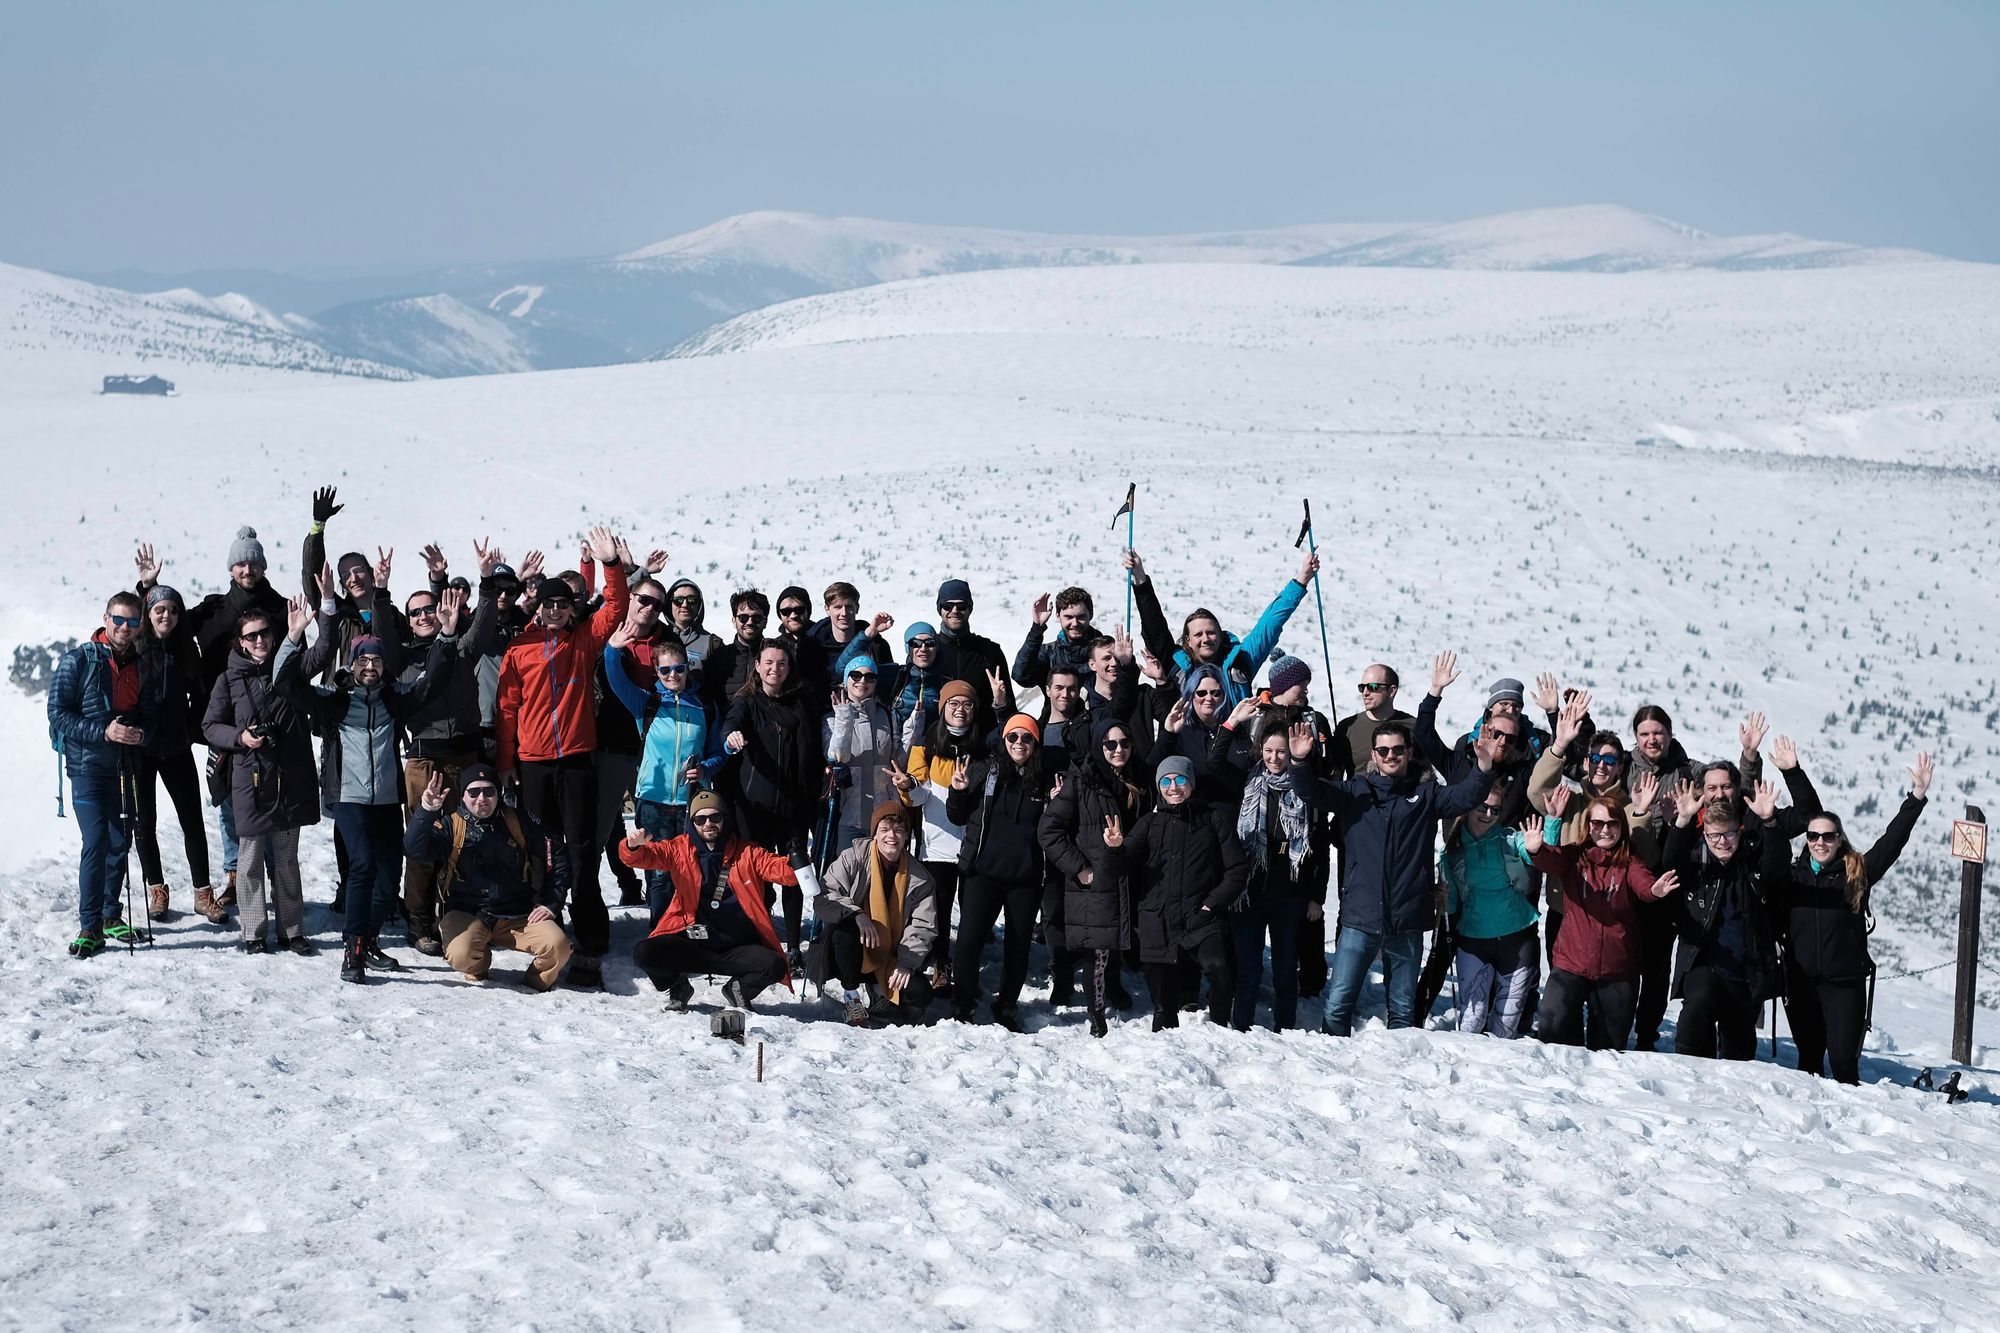 Group photo in the snow of the Apifiers who made it to the top of Sněžka.